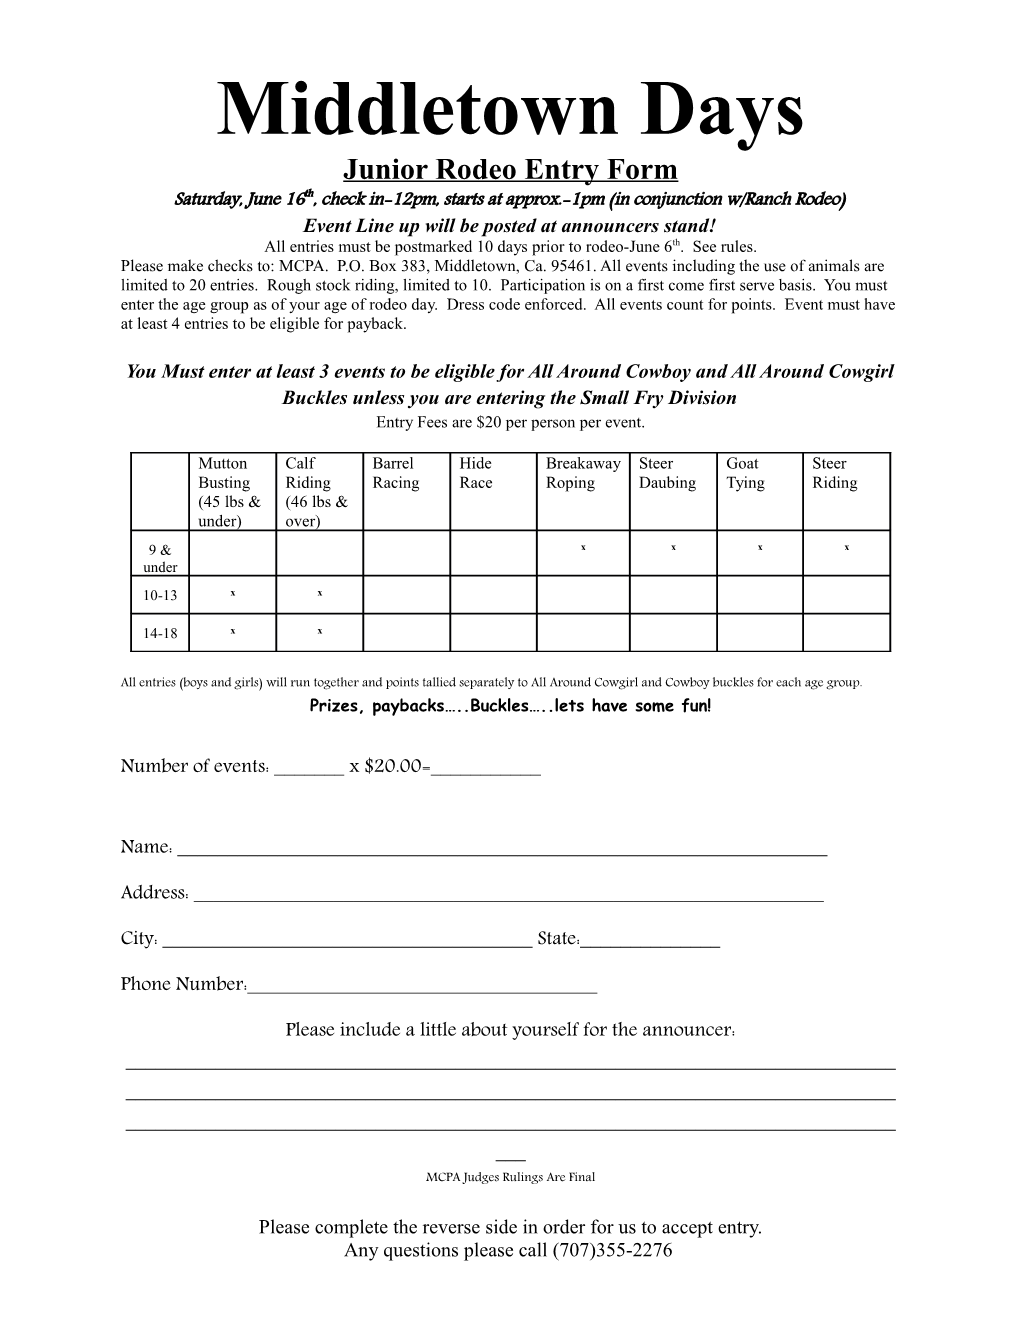 Junior Rodeo Entry Form